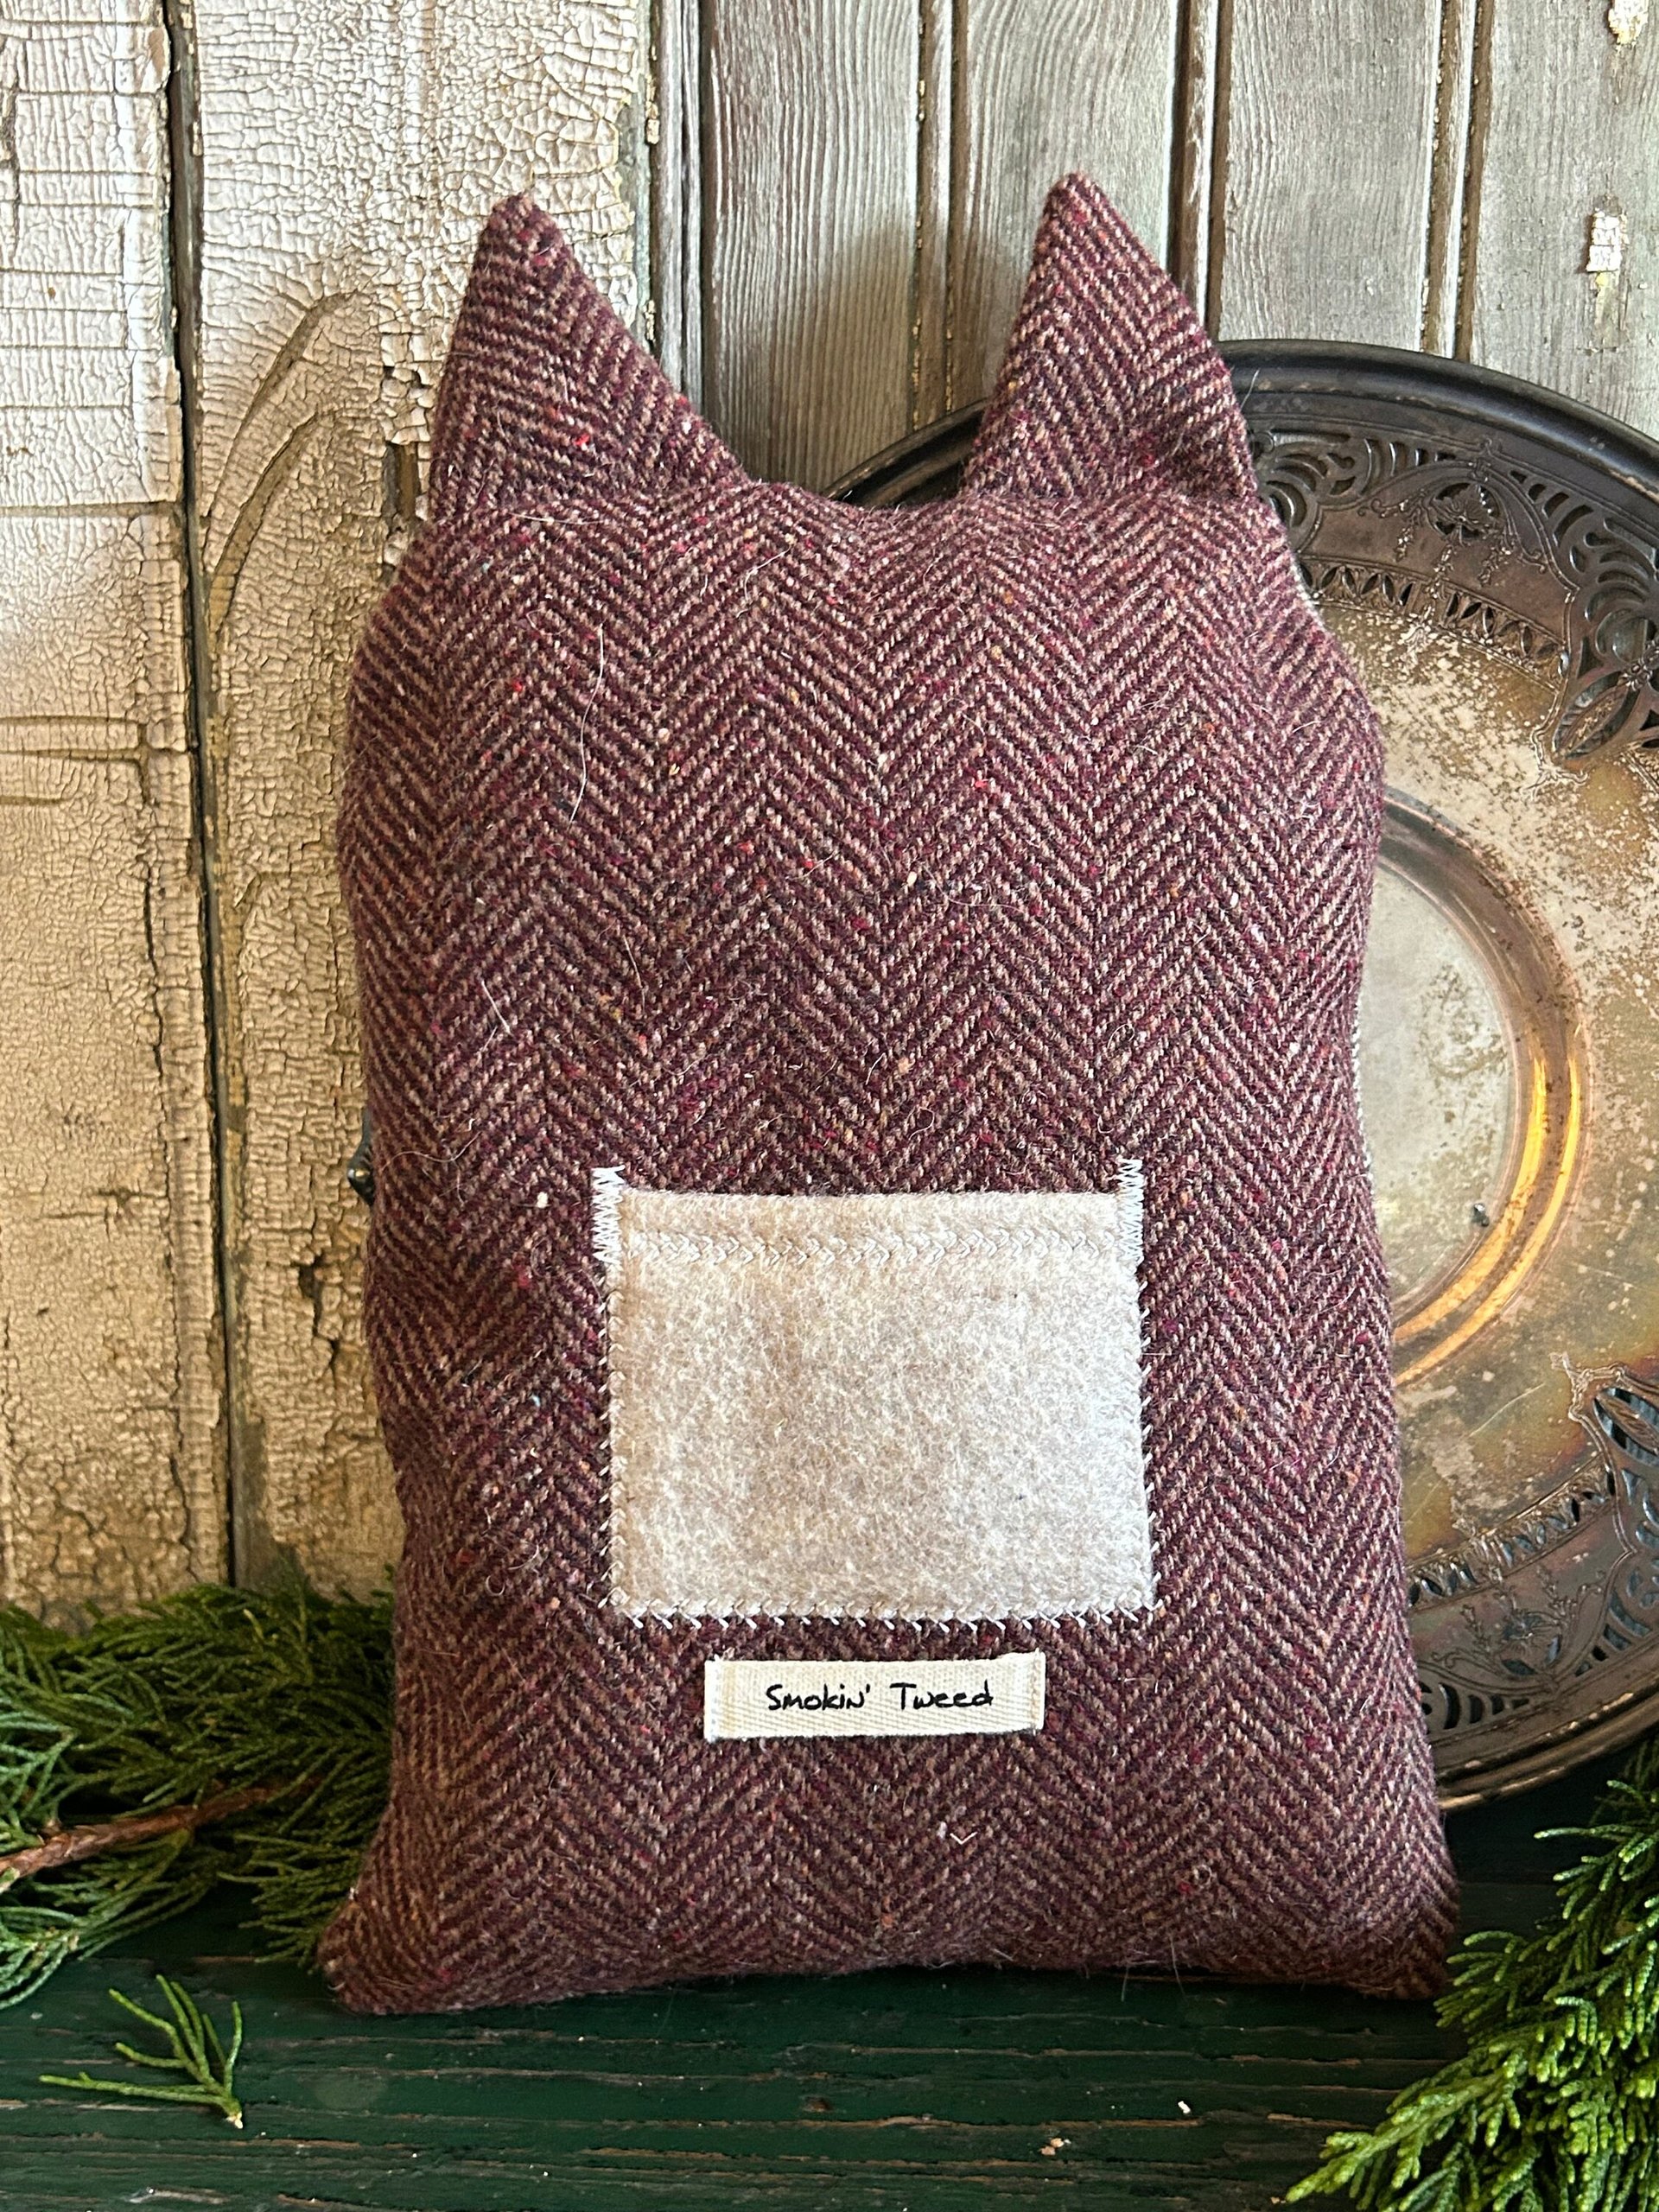 Tooth Fairy Pillow, Kitty Cat, Recycled Wool Tweed